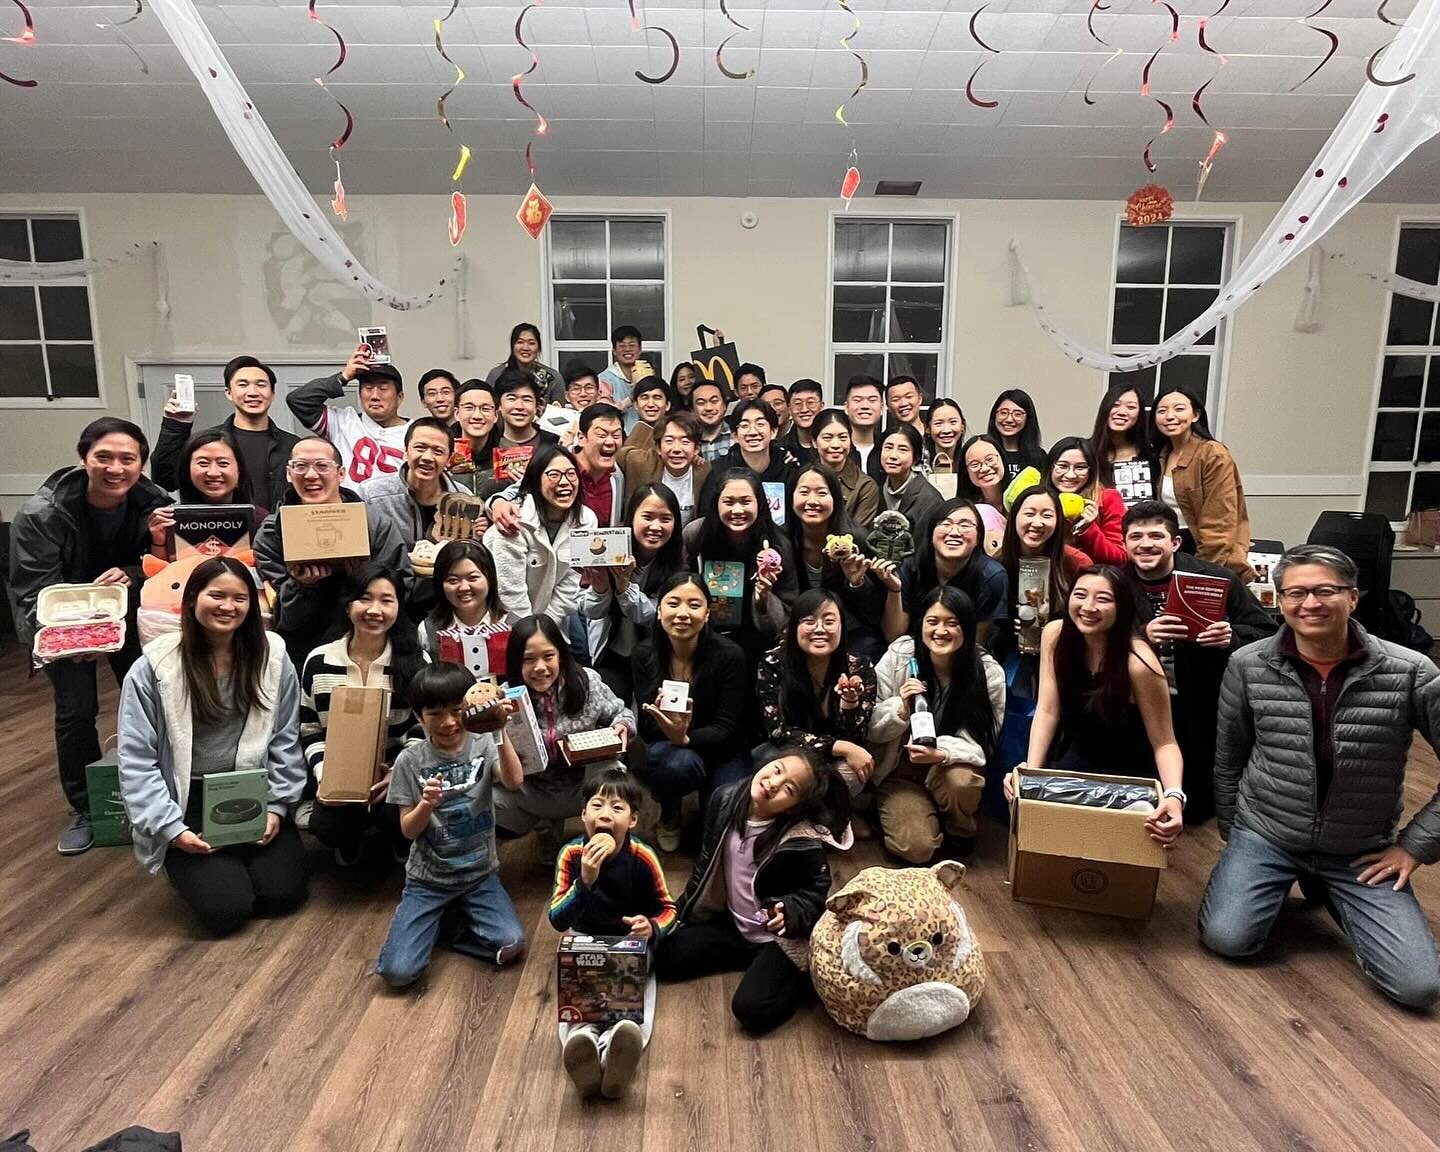 We&rsquo;re potLUCKy to have each other! ❤️🐉

This past Saturday, LSF gathered together to have the annual red elephant gift exchange! Everyone enjoyed an Asian-inspired potluck which featured every variation of noodles and rice you could think of. 